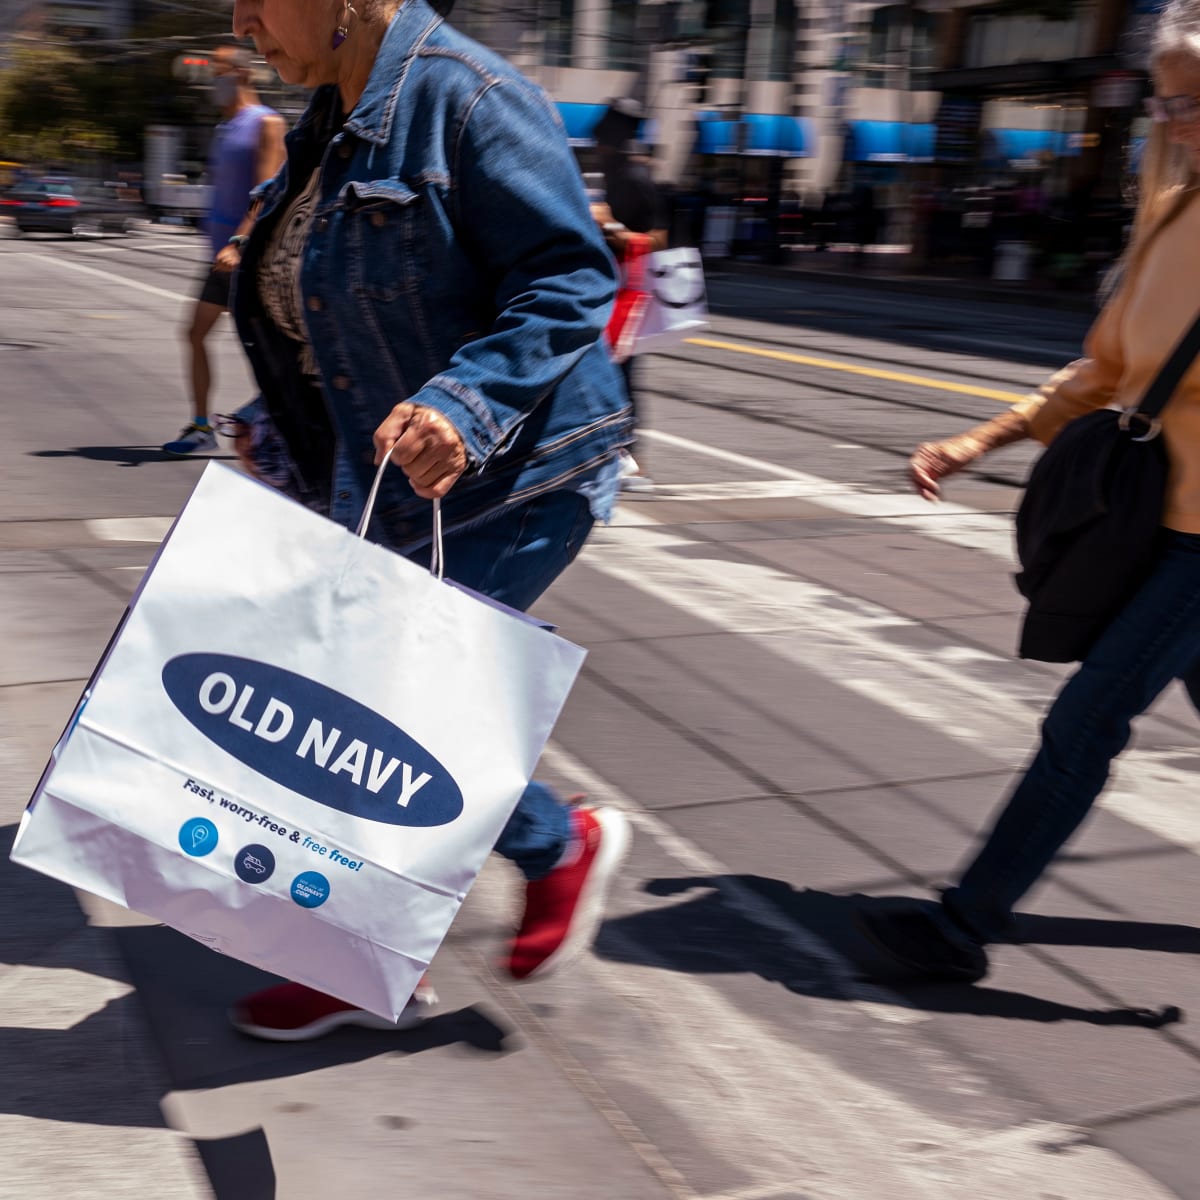 Old Navy Vs. Gap: Which Store Is Better?